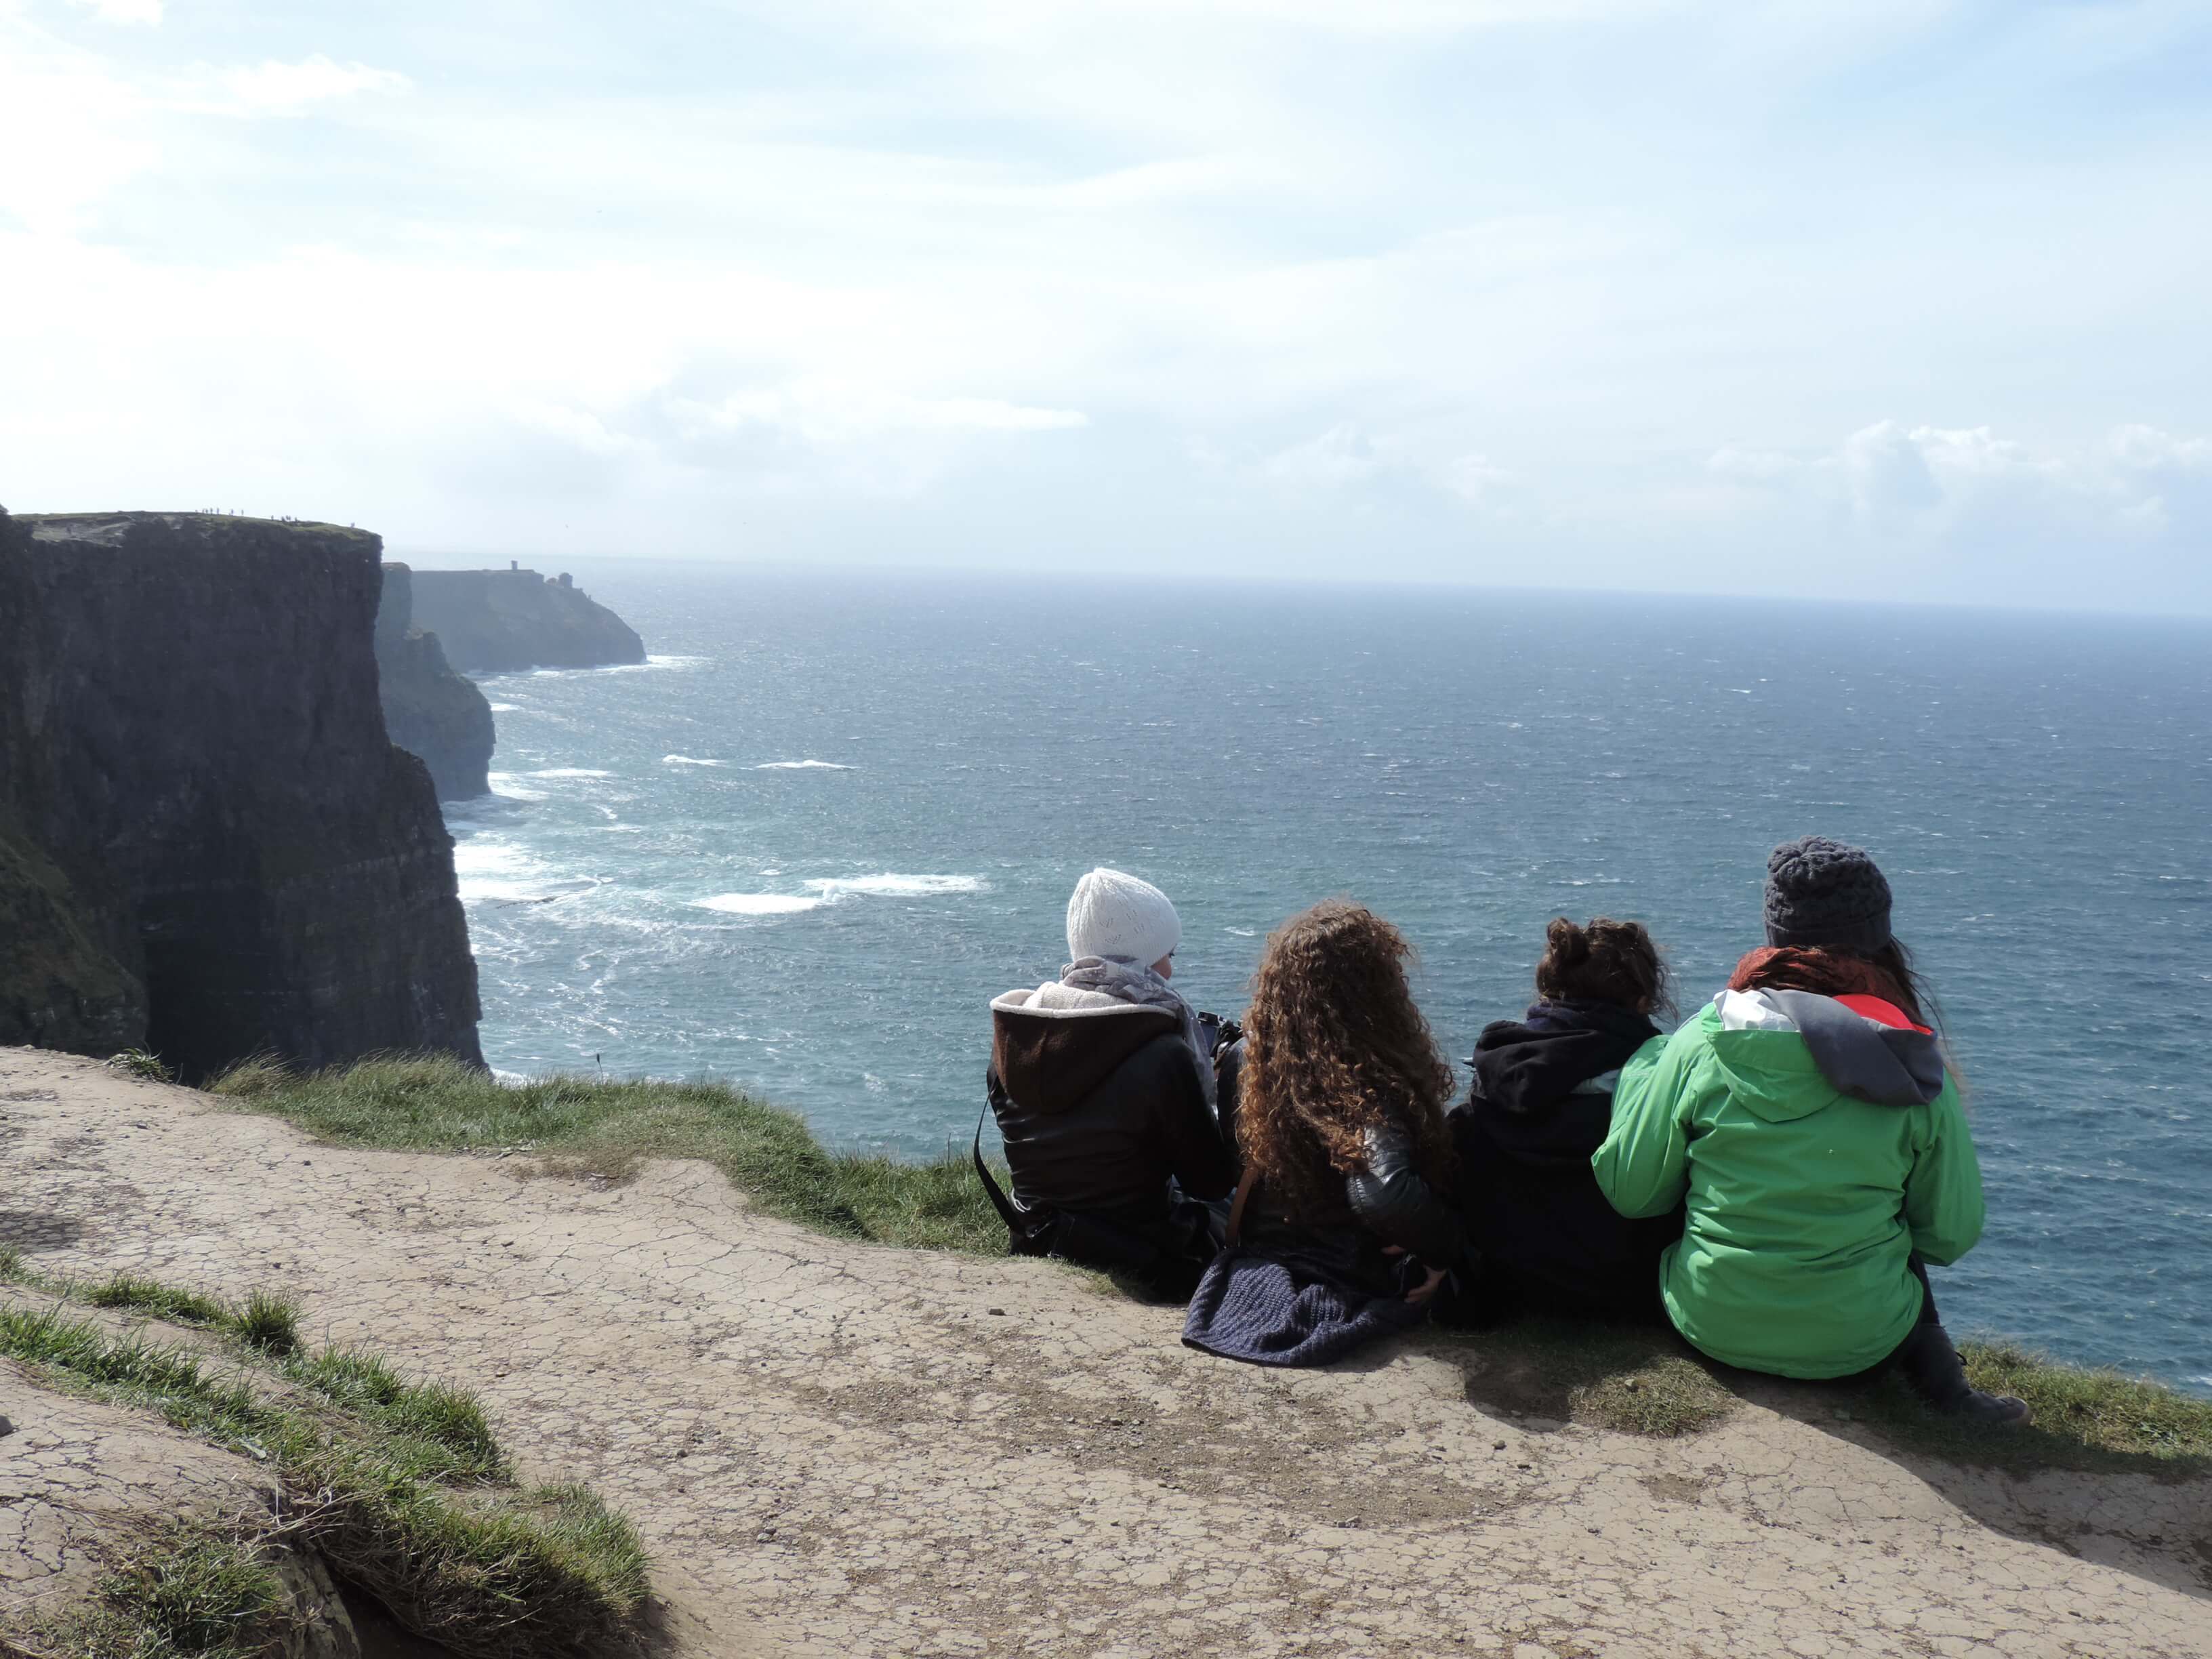 Sitting by the Cliffs of Moher